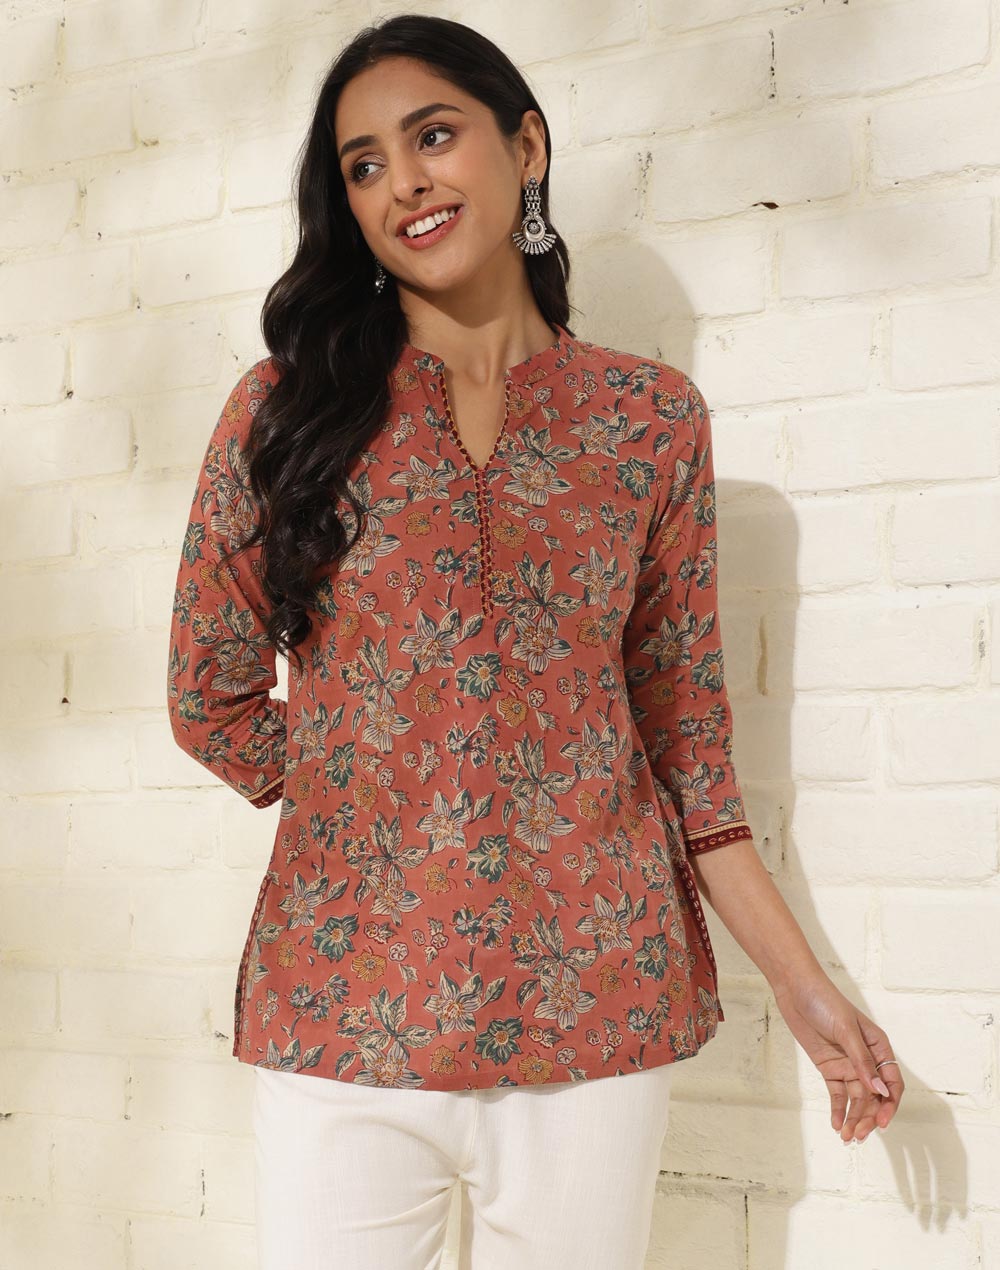 Estonished Red Printed Spaghetti Top With Solid Black Shorts, EST-SHREE-016